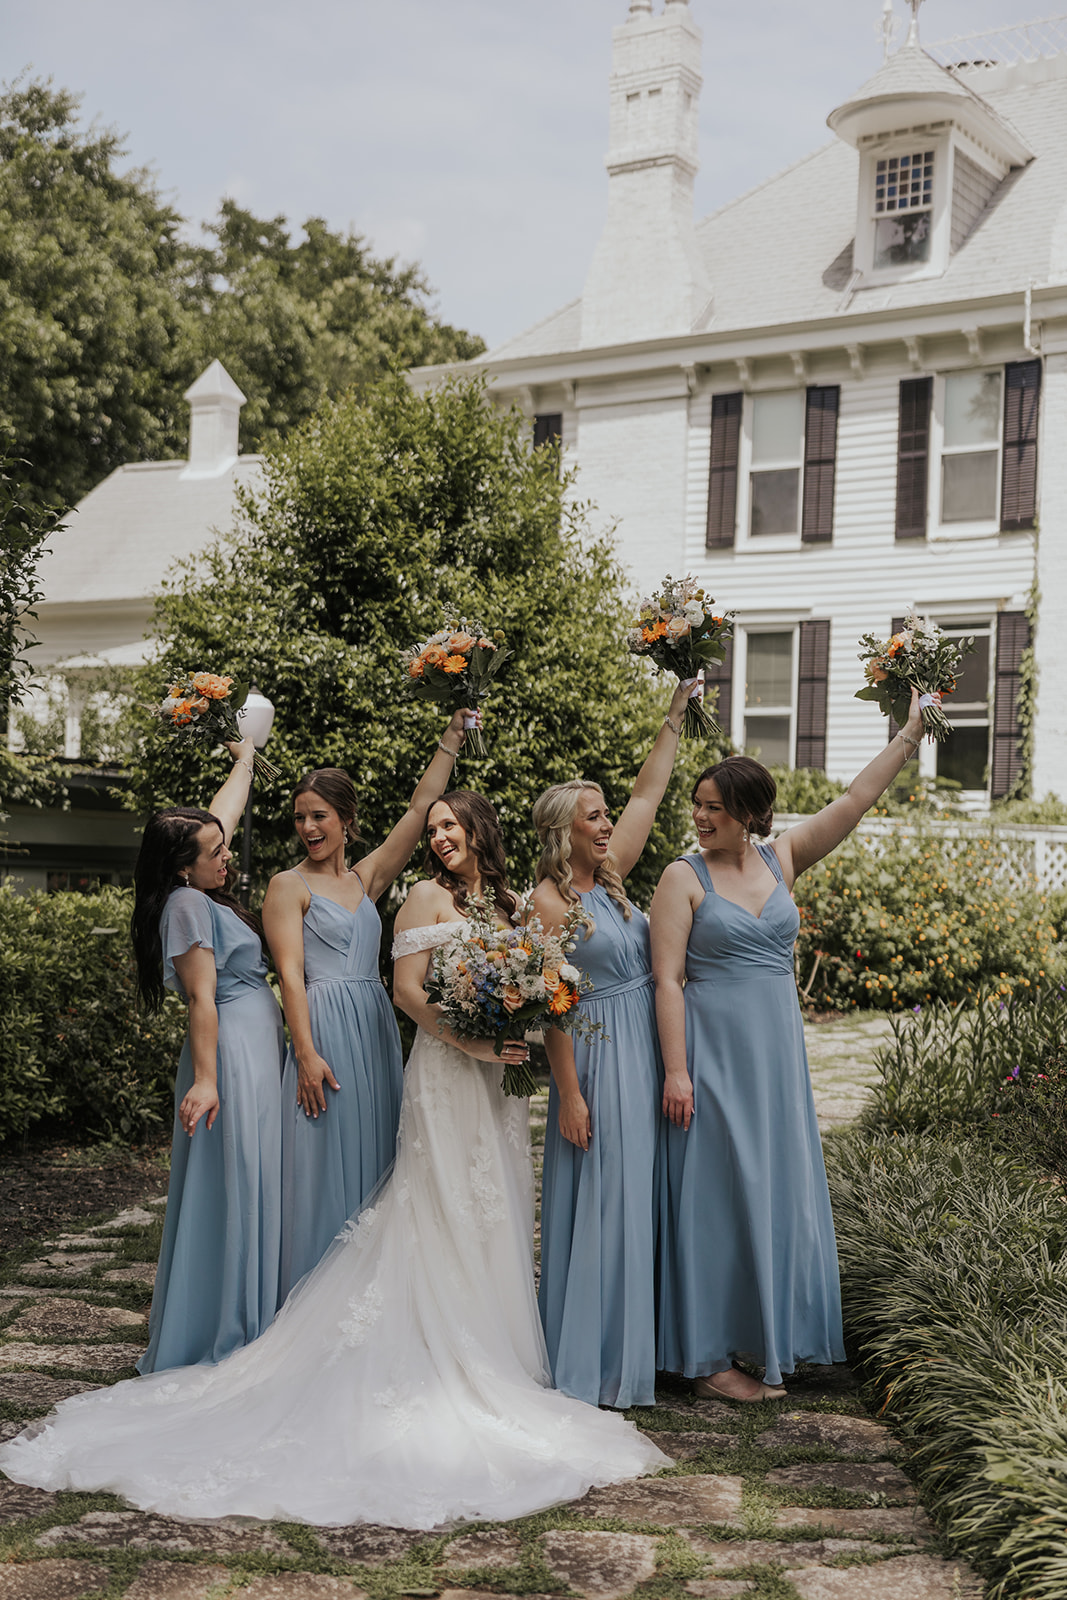 Bridesmaids take a photo with the stunning bride after her sentimental Georgia wedding